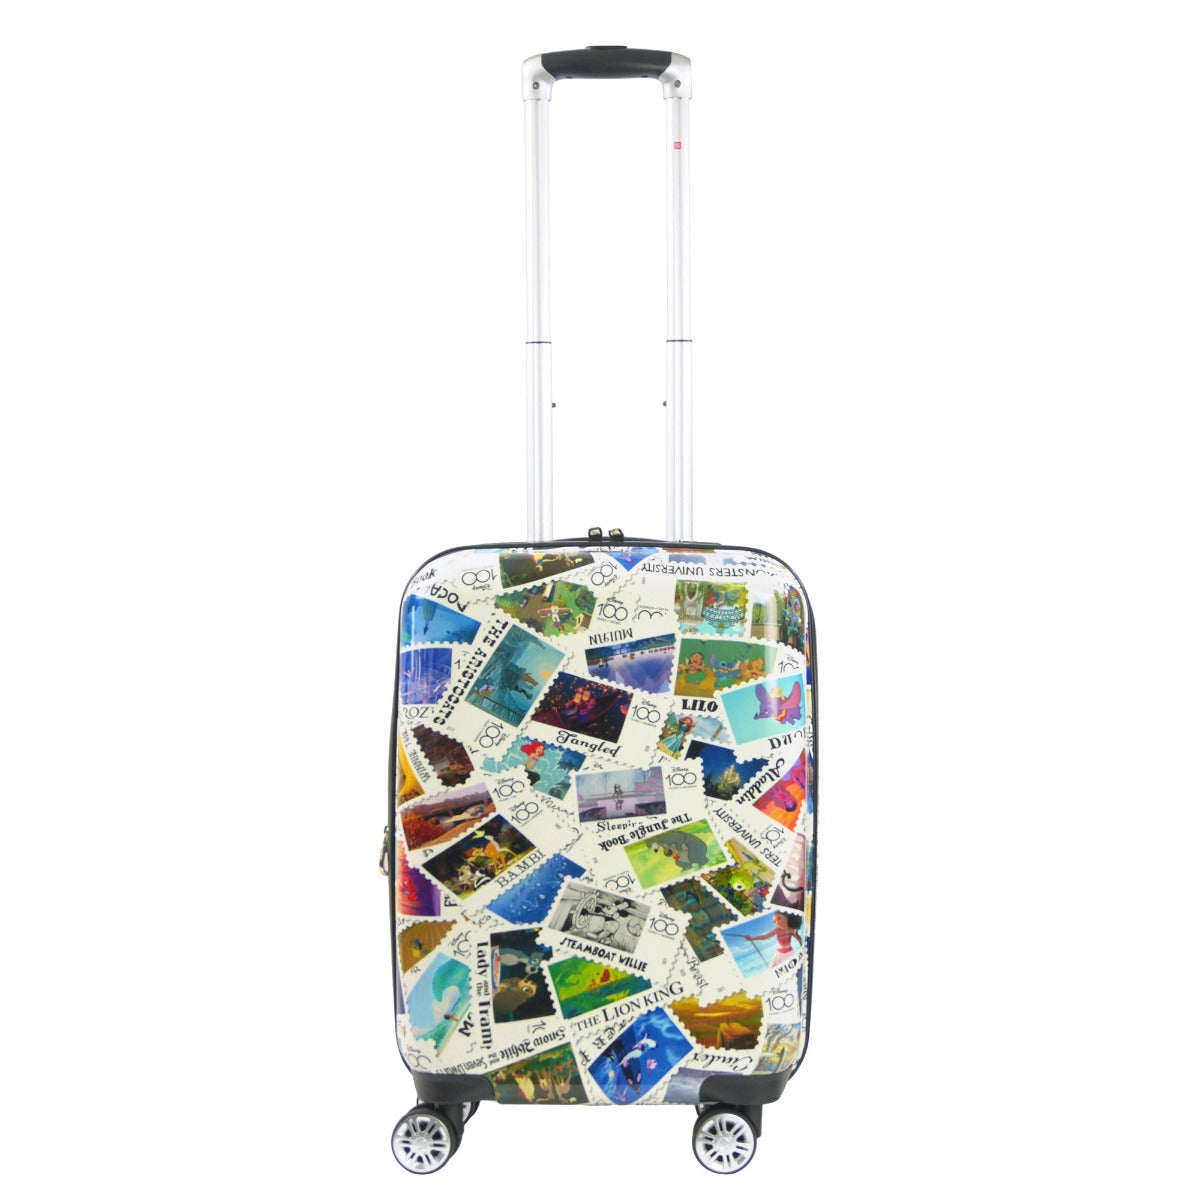 Ful Disney 100 Year Anniversary Stamps ABS Hardsided Spinner Suitcase 22" carry-on Luggage 360 spinner wheels Limited Edition 360 degree wheels